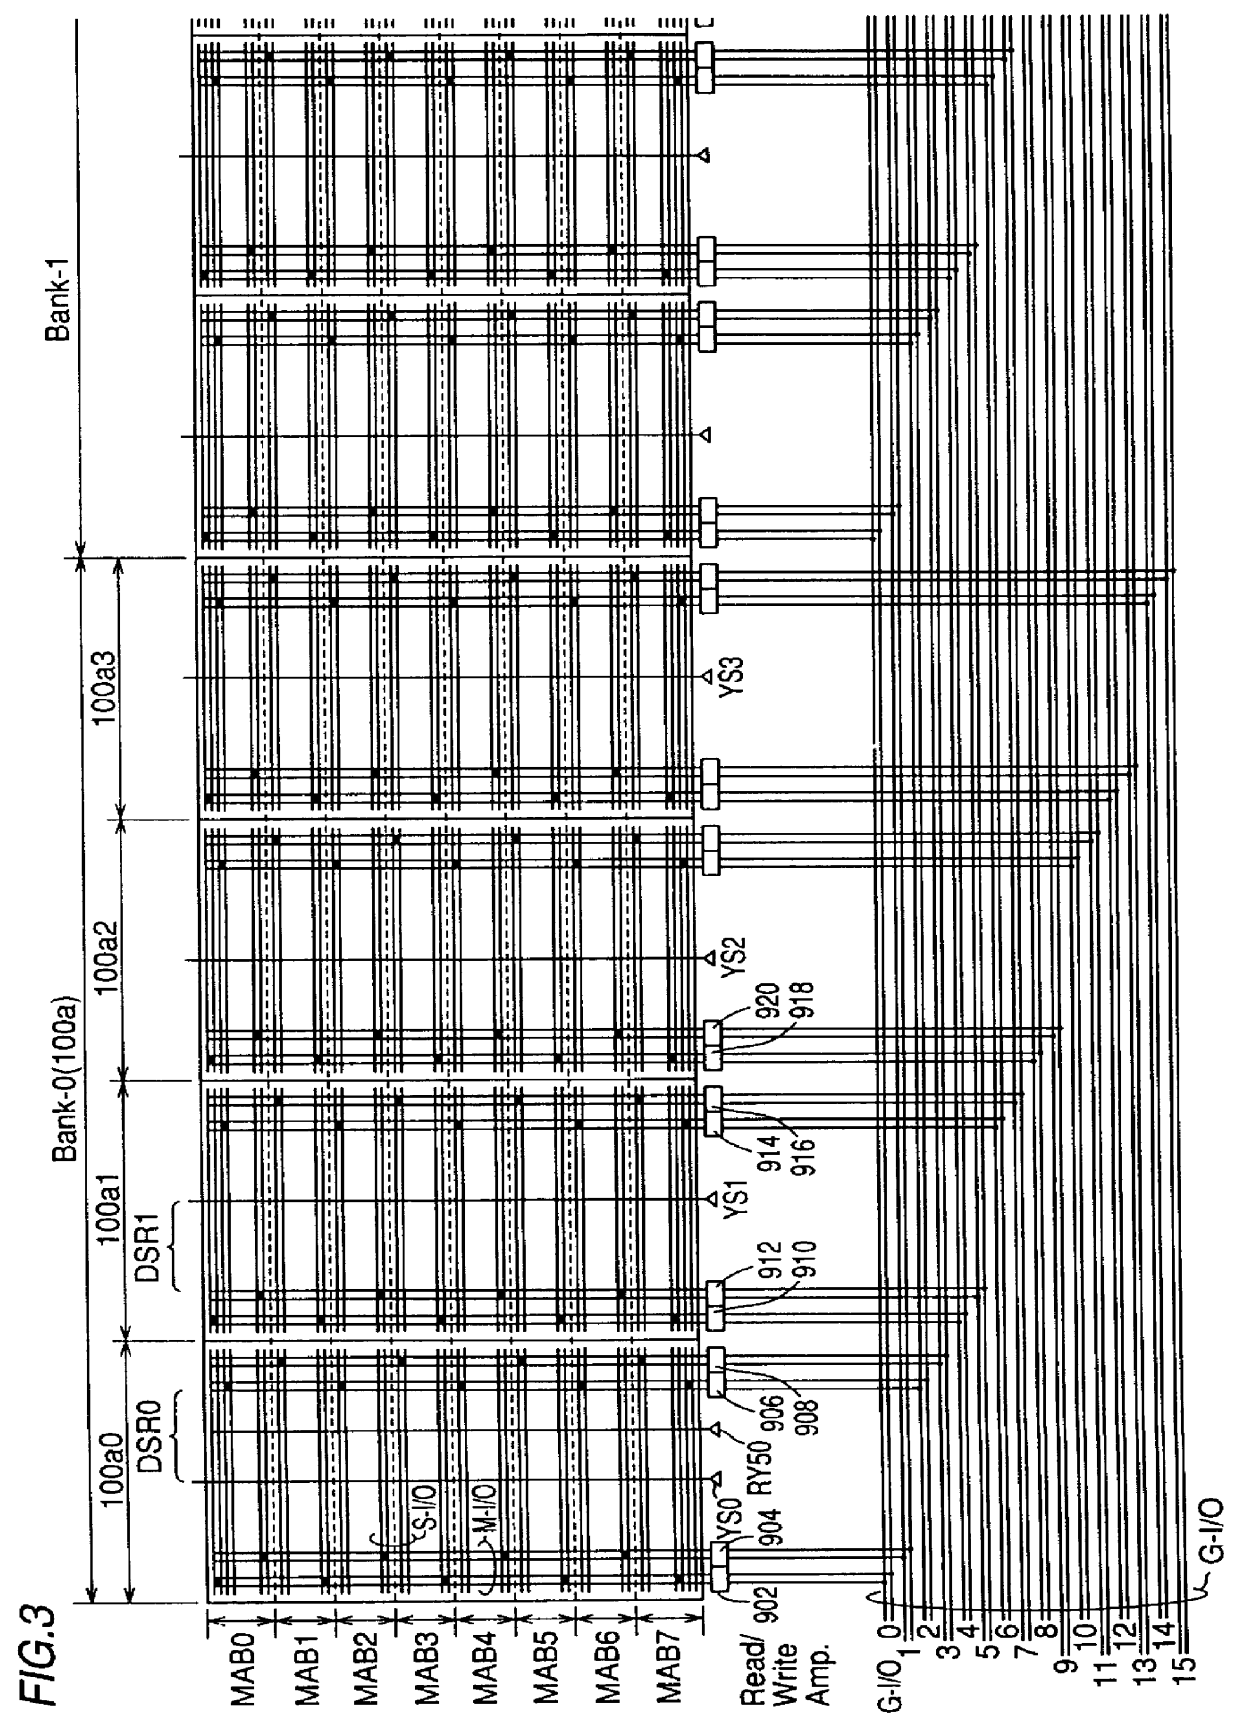 Synchronous semiconductor memory device having redundant circuit of high repair efficiency and allowing high speed access